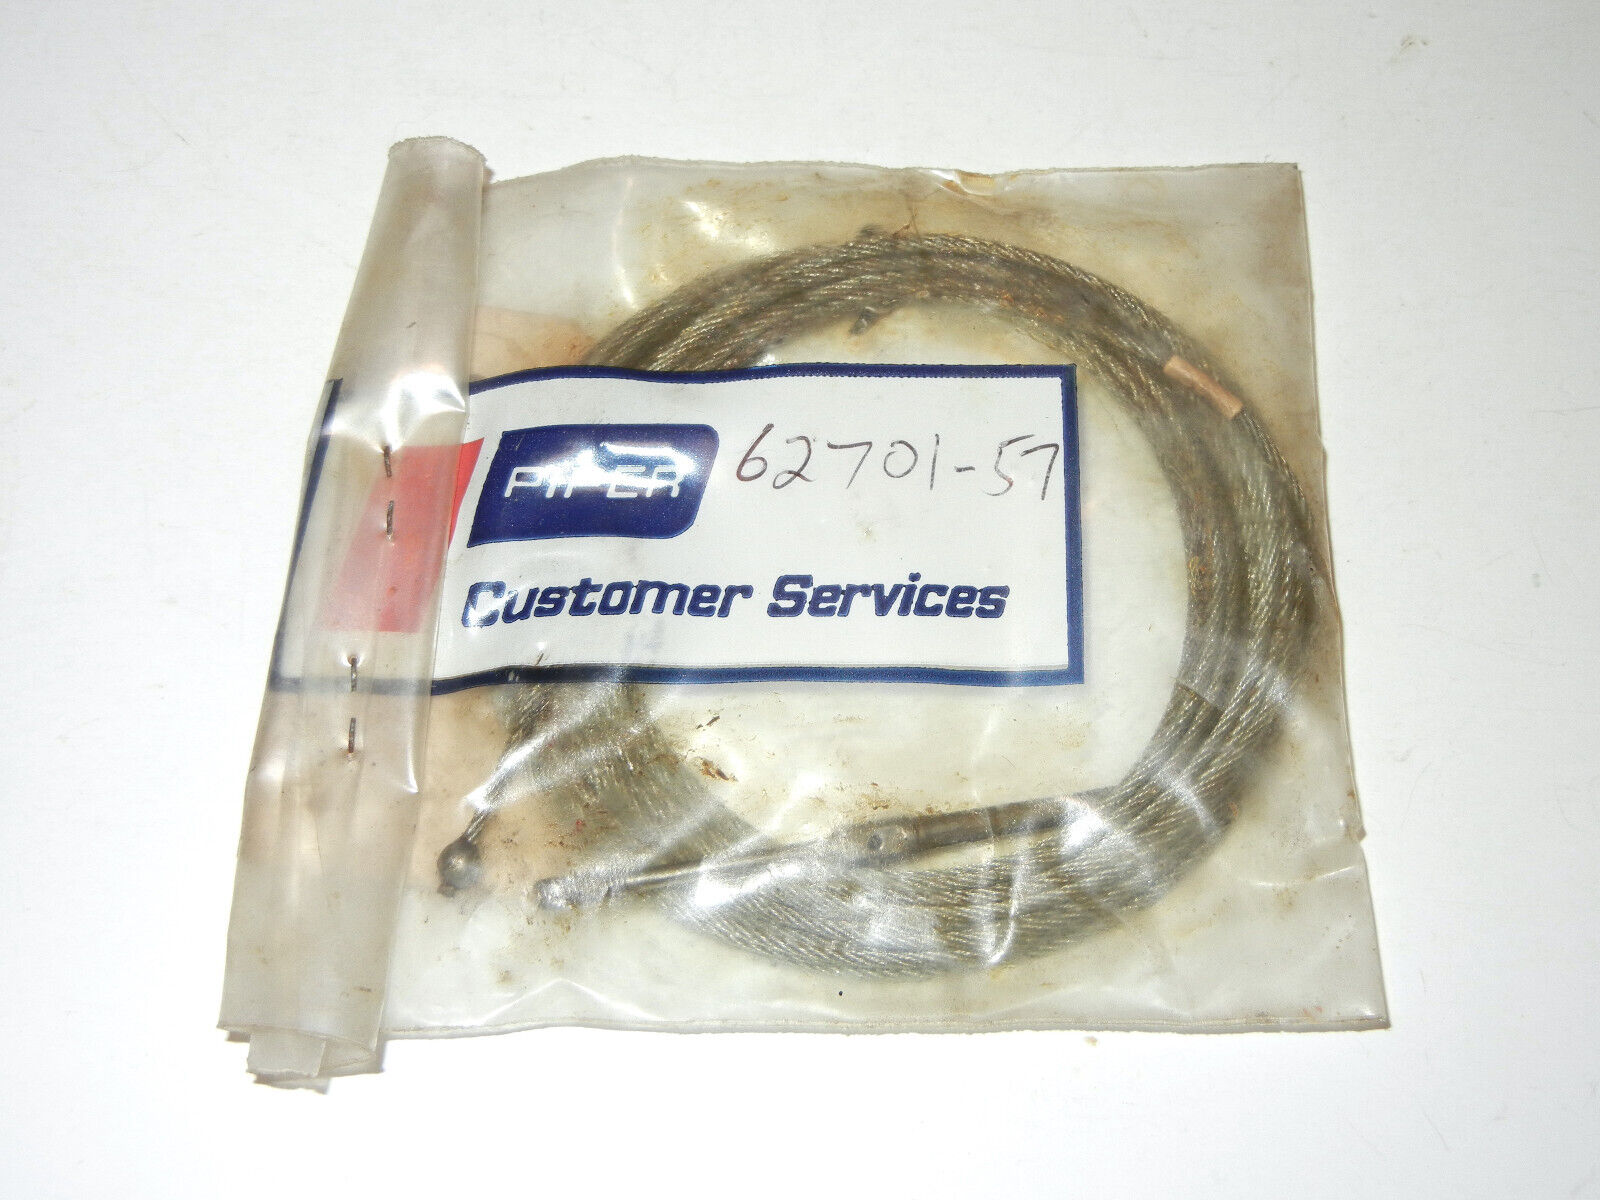 PIPER AIRCRAFT 62701-57 CABLE